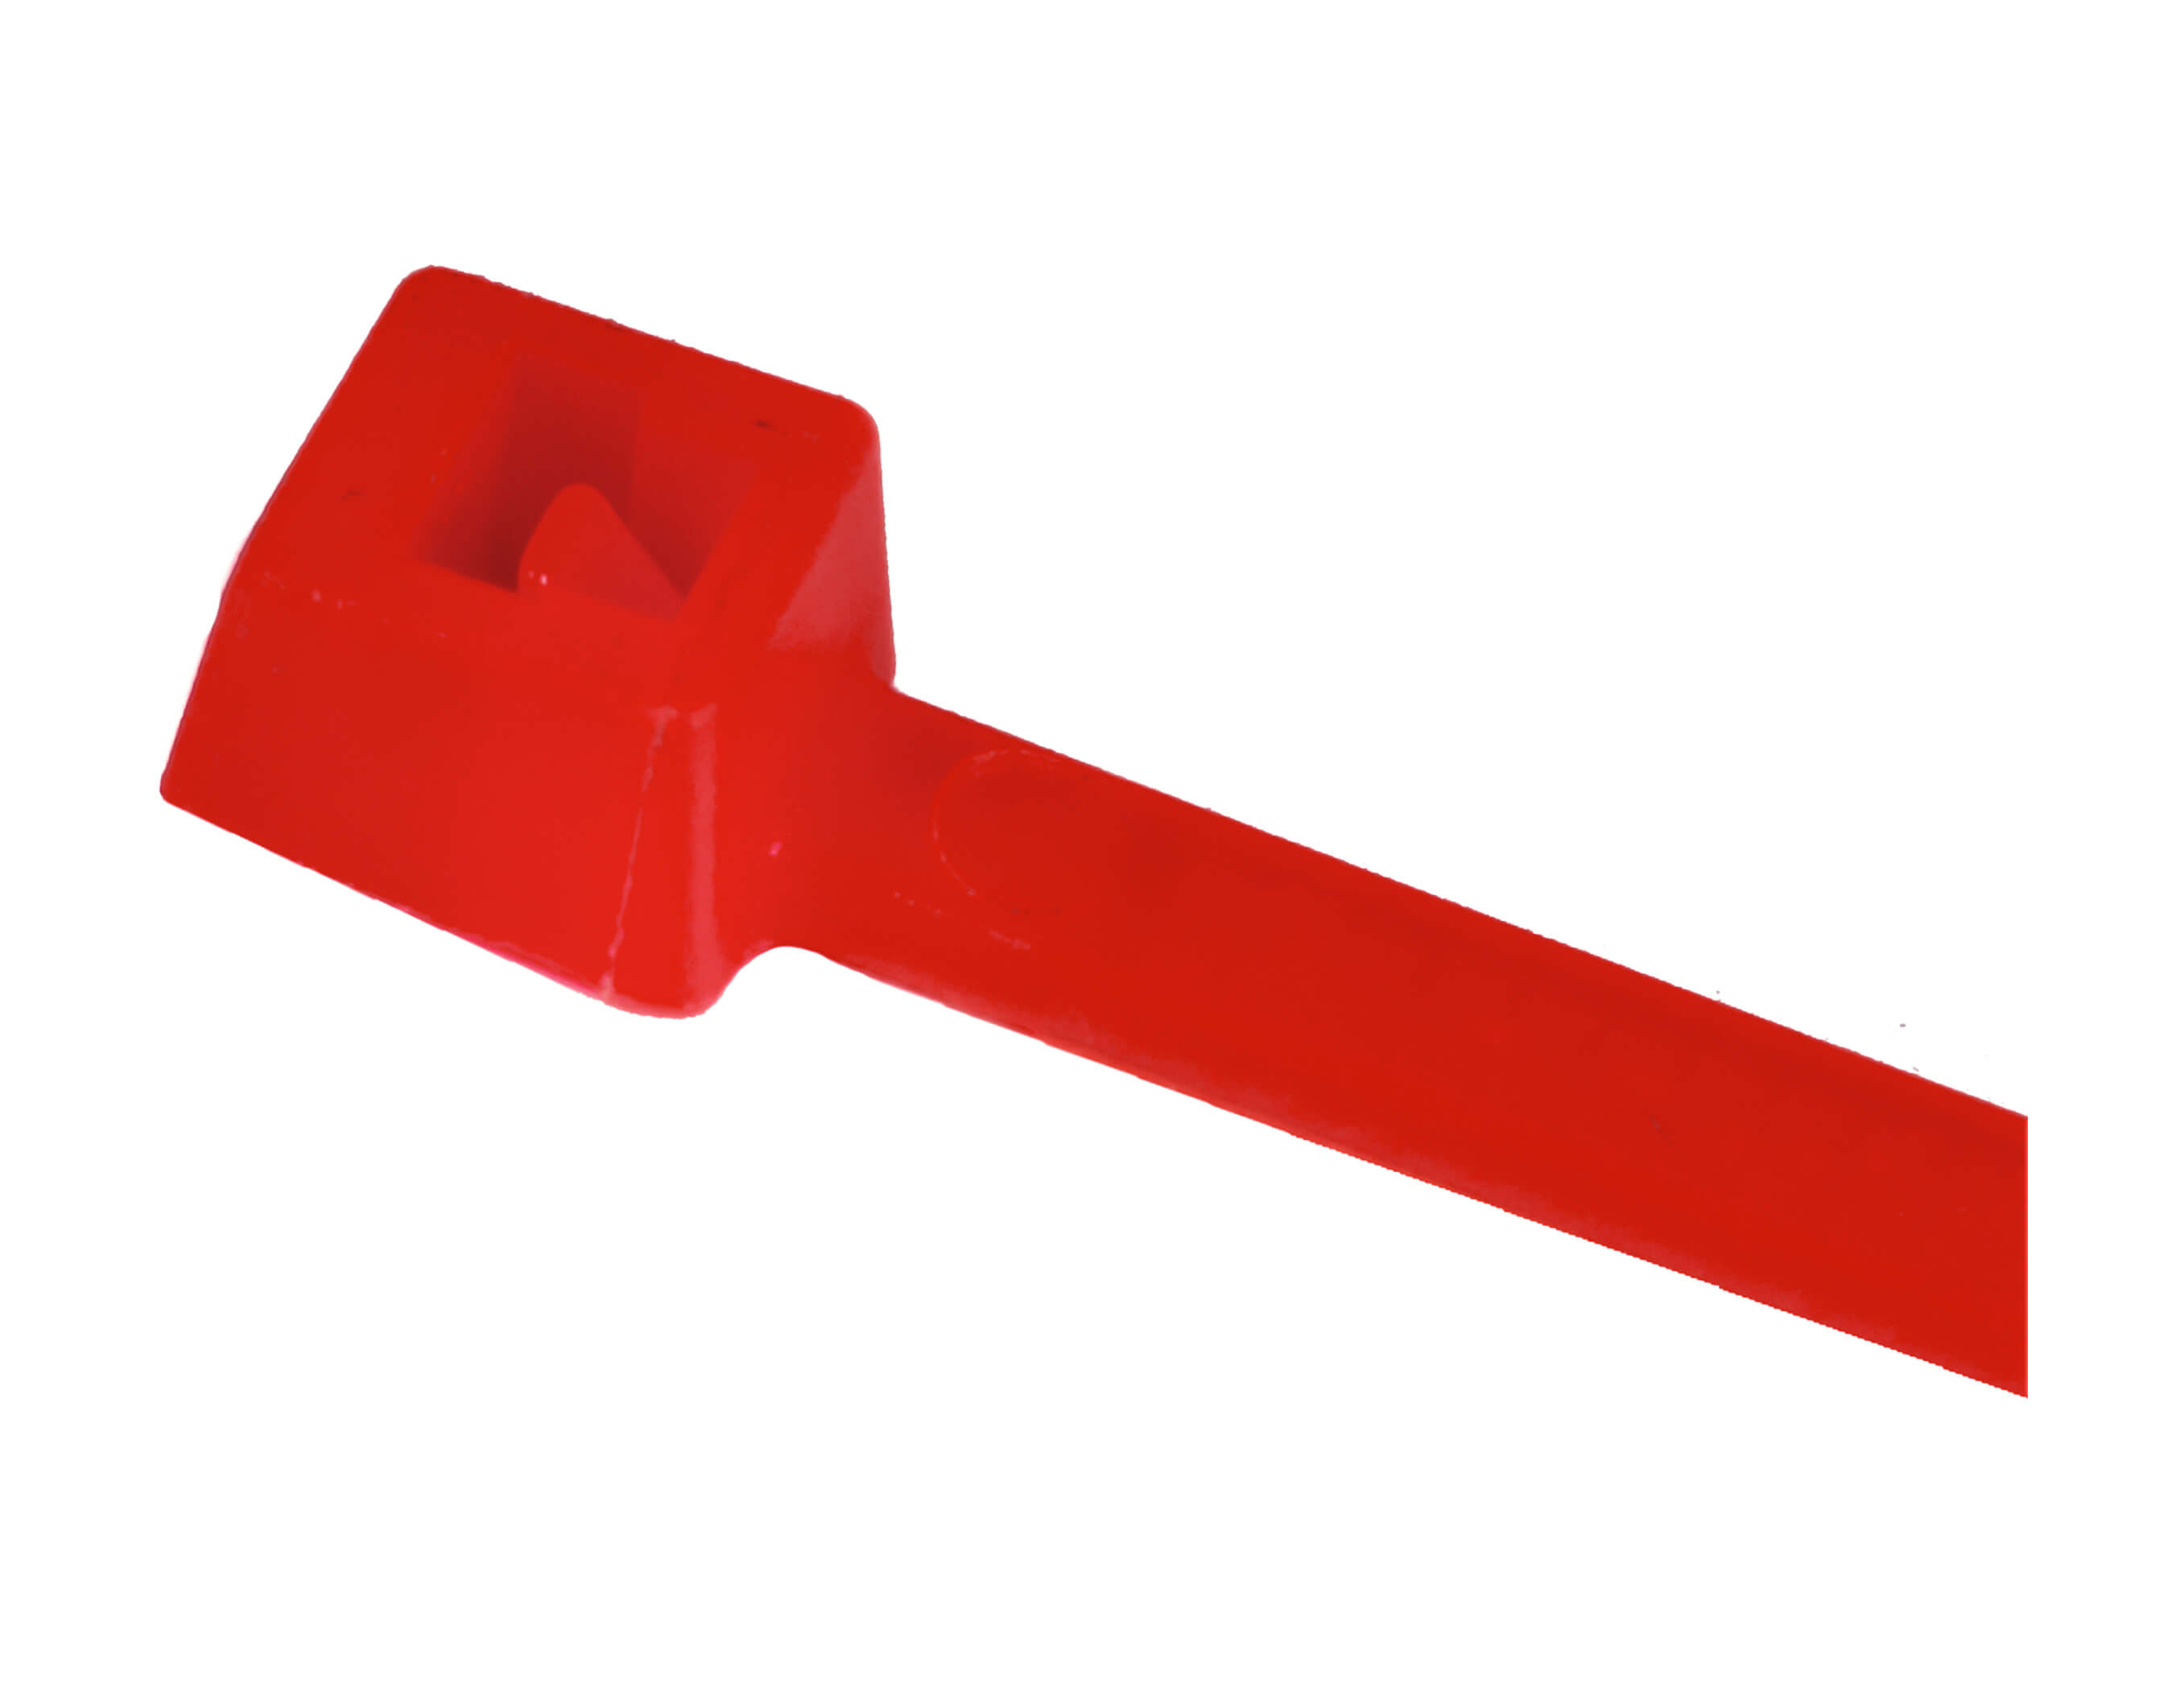 WIRE TIE PLST PLASTIC TONGUE RED   0.19"X11.8"